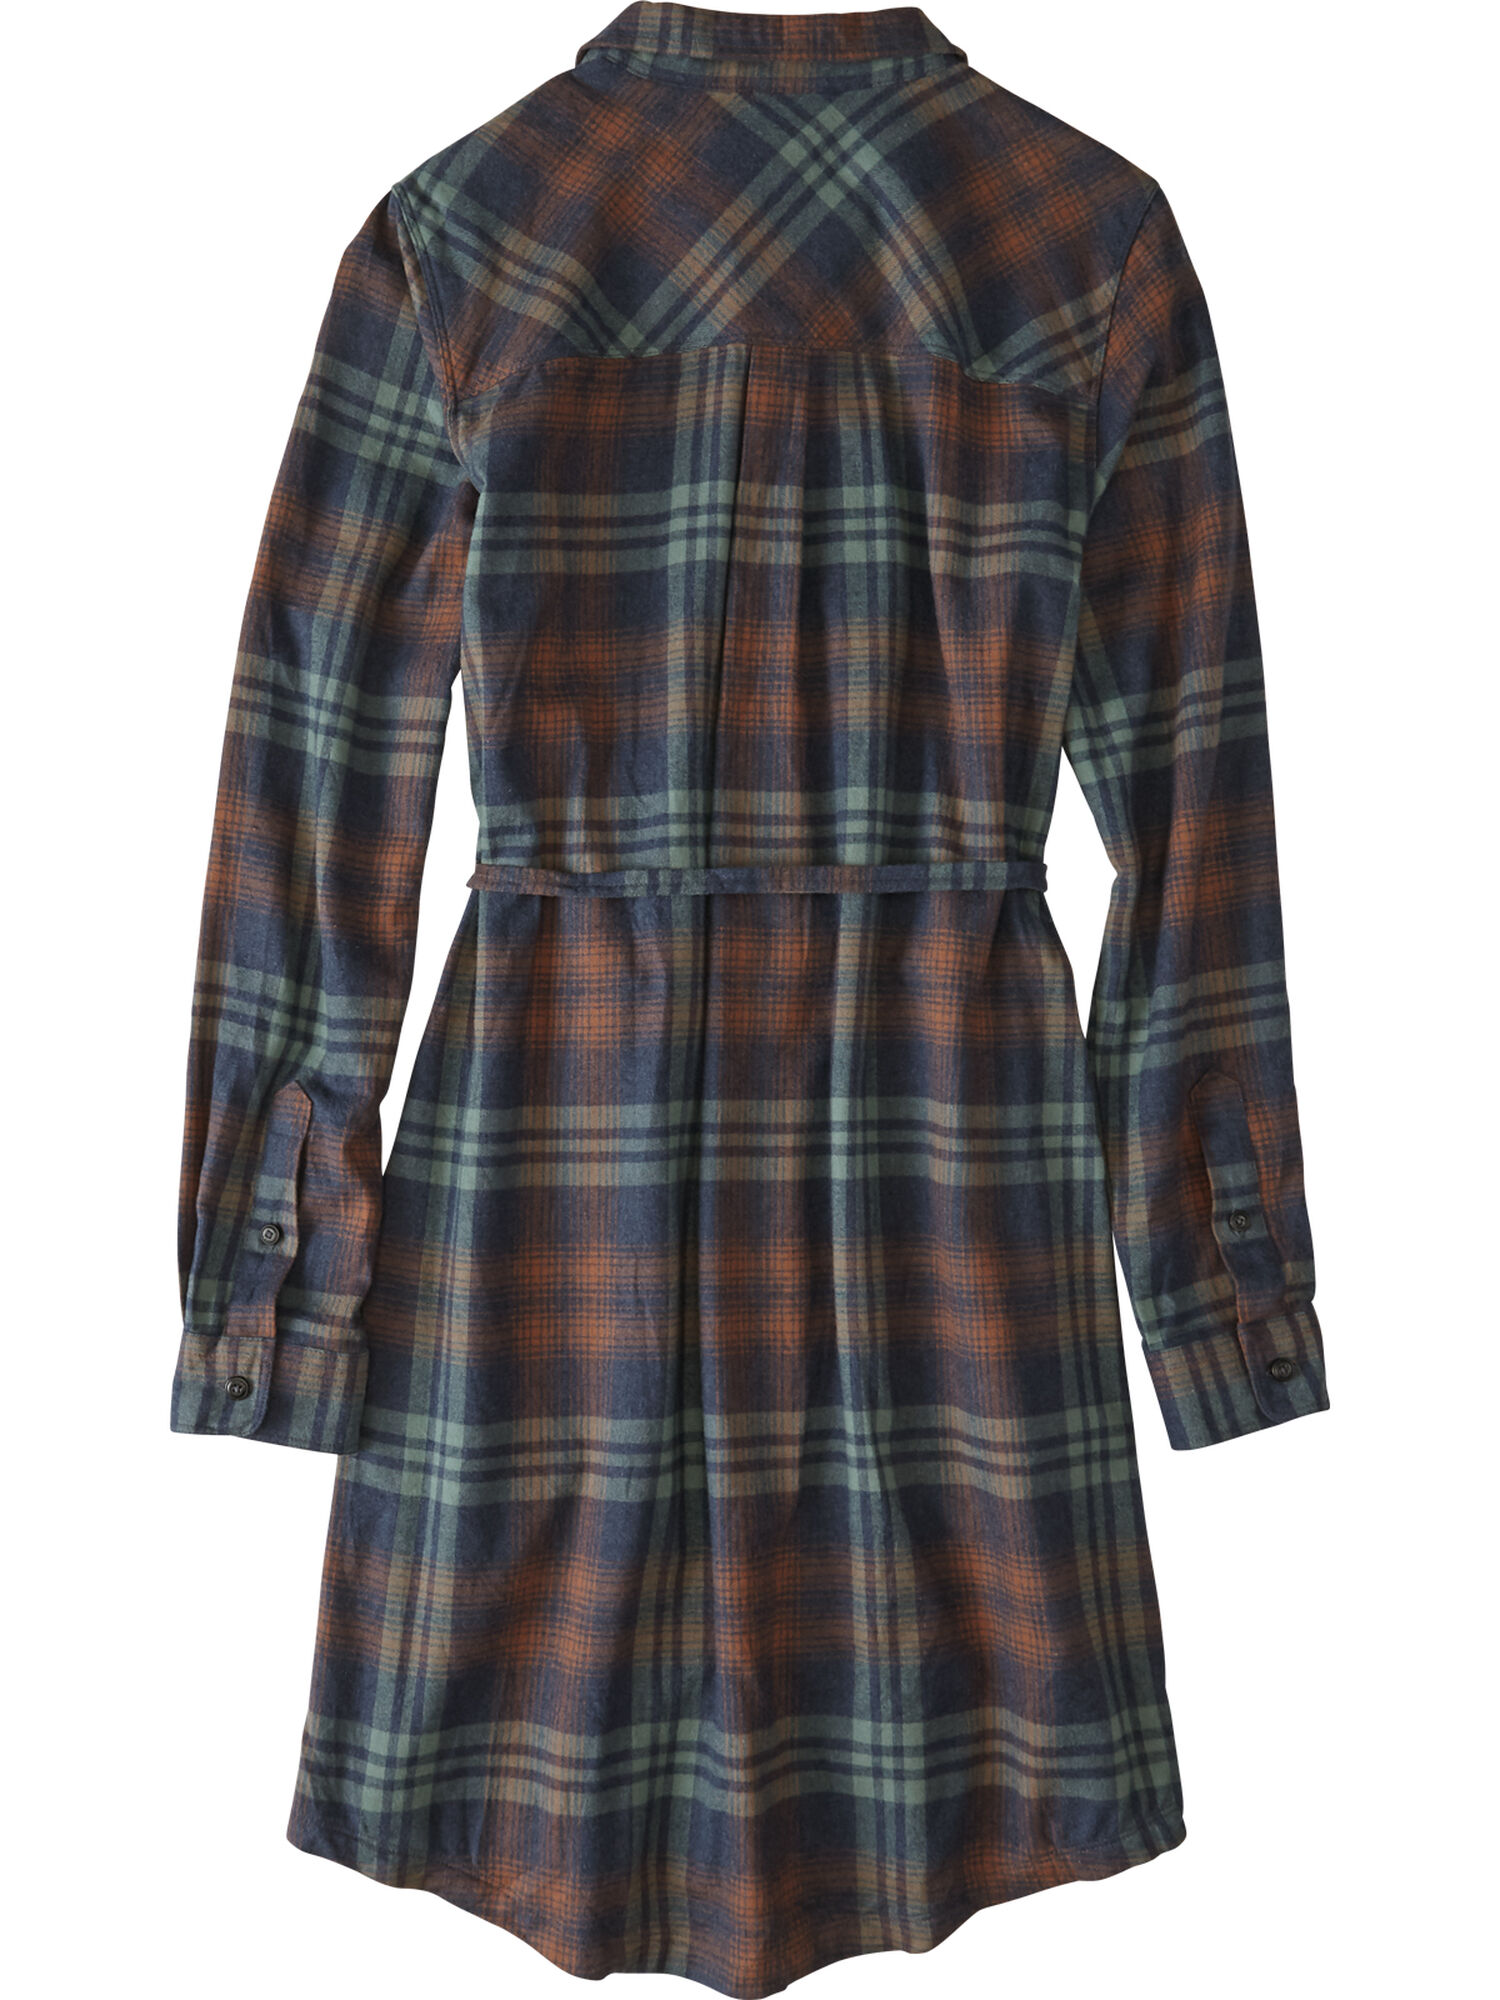 Toad&Co Flannel Shirtdress: Plaiditude | Title Nine